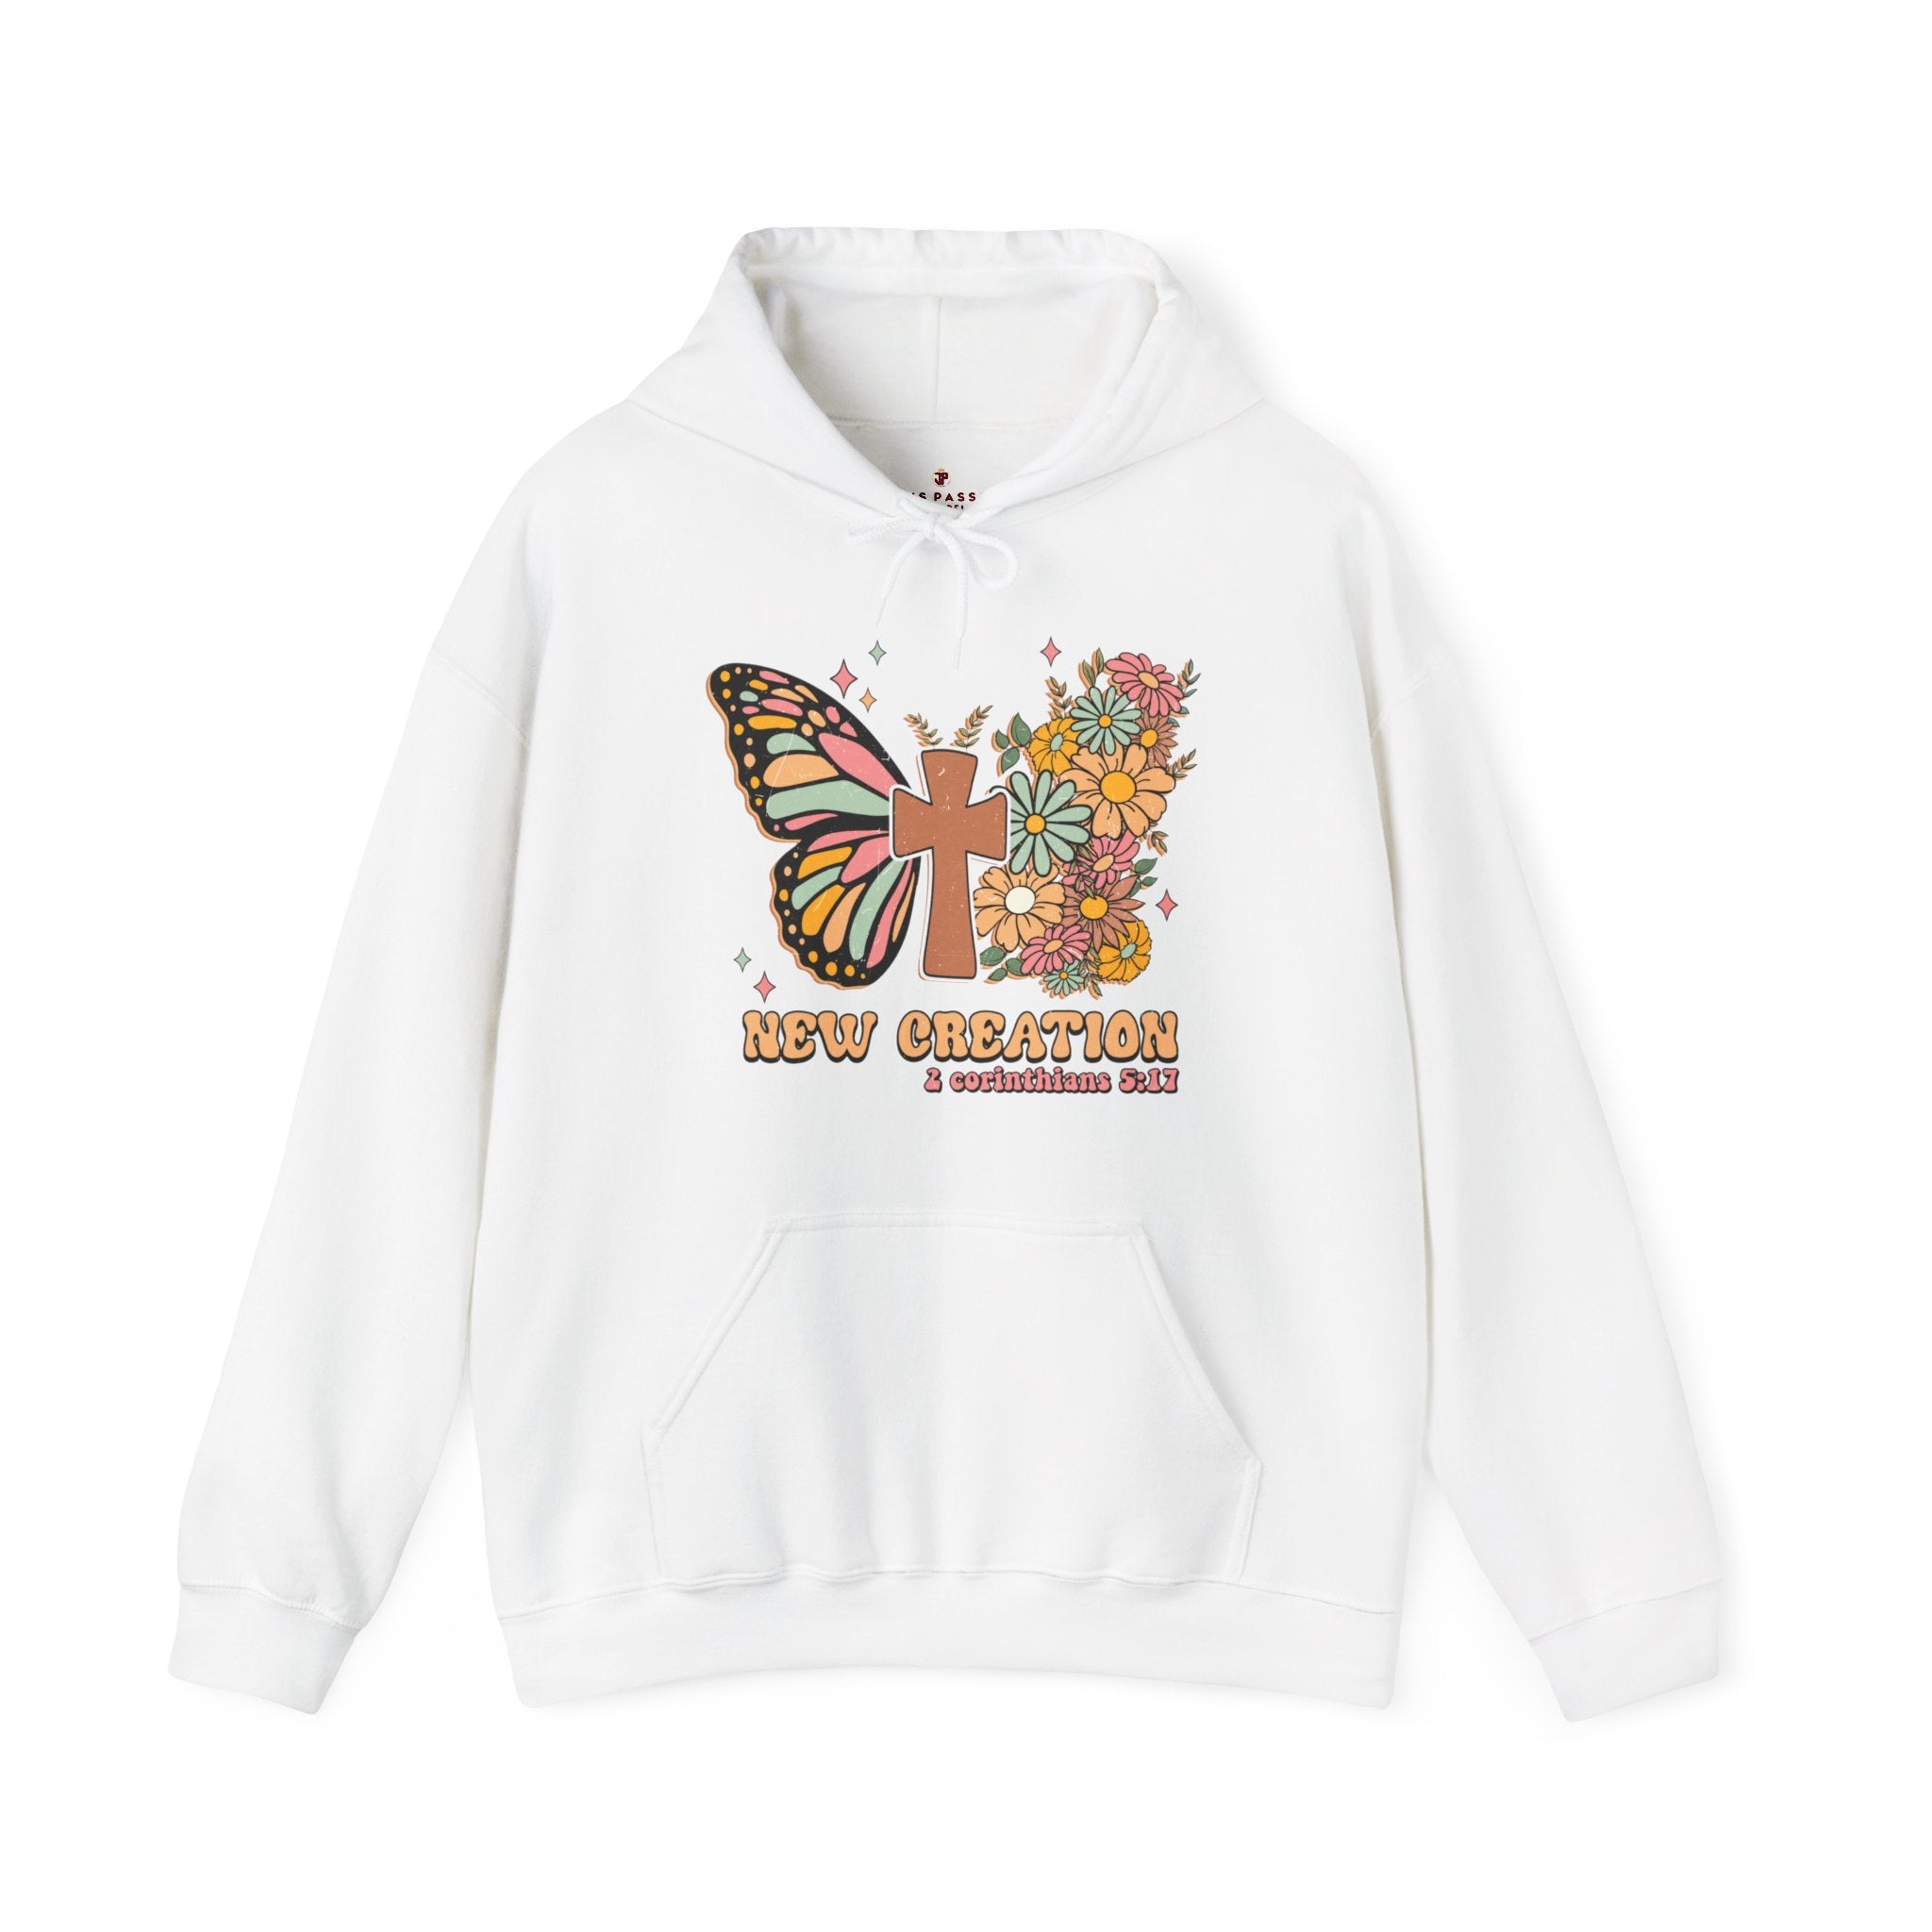 New Creation Butterfly Retro-Inspired Unisex-Fit Hoodie Color: White Size: S Jesus Passion Apparel